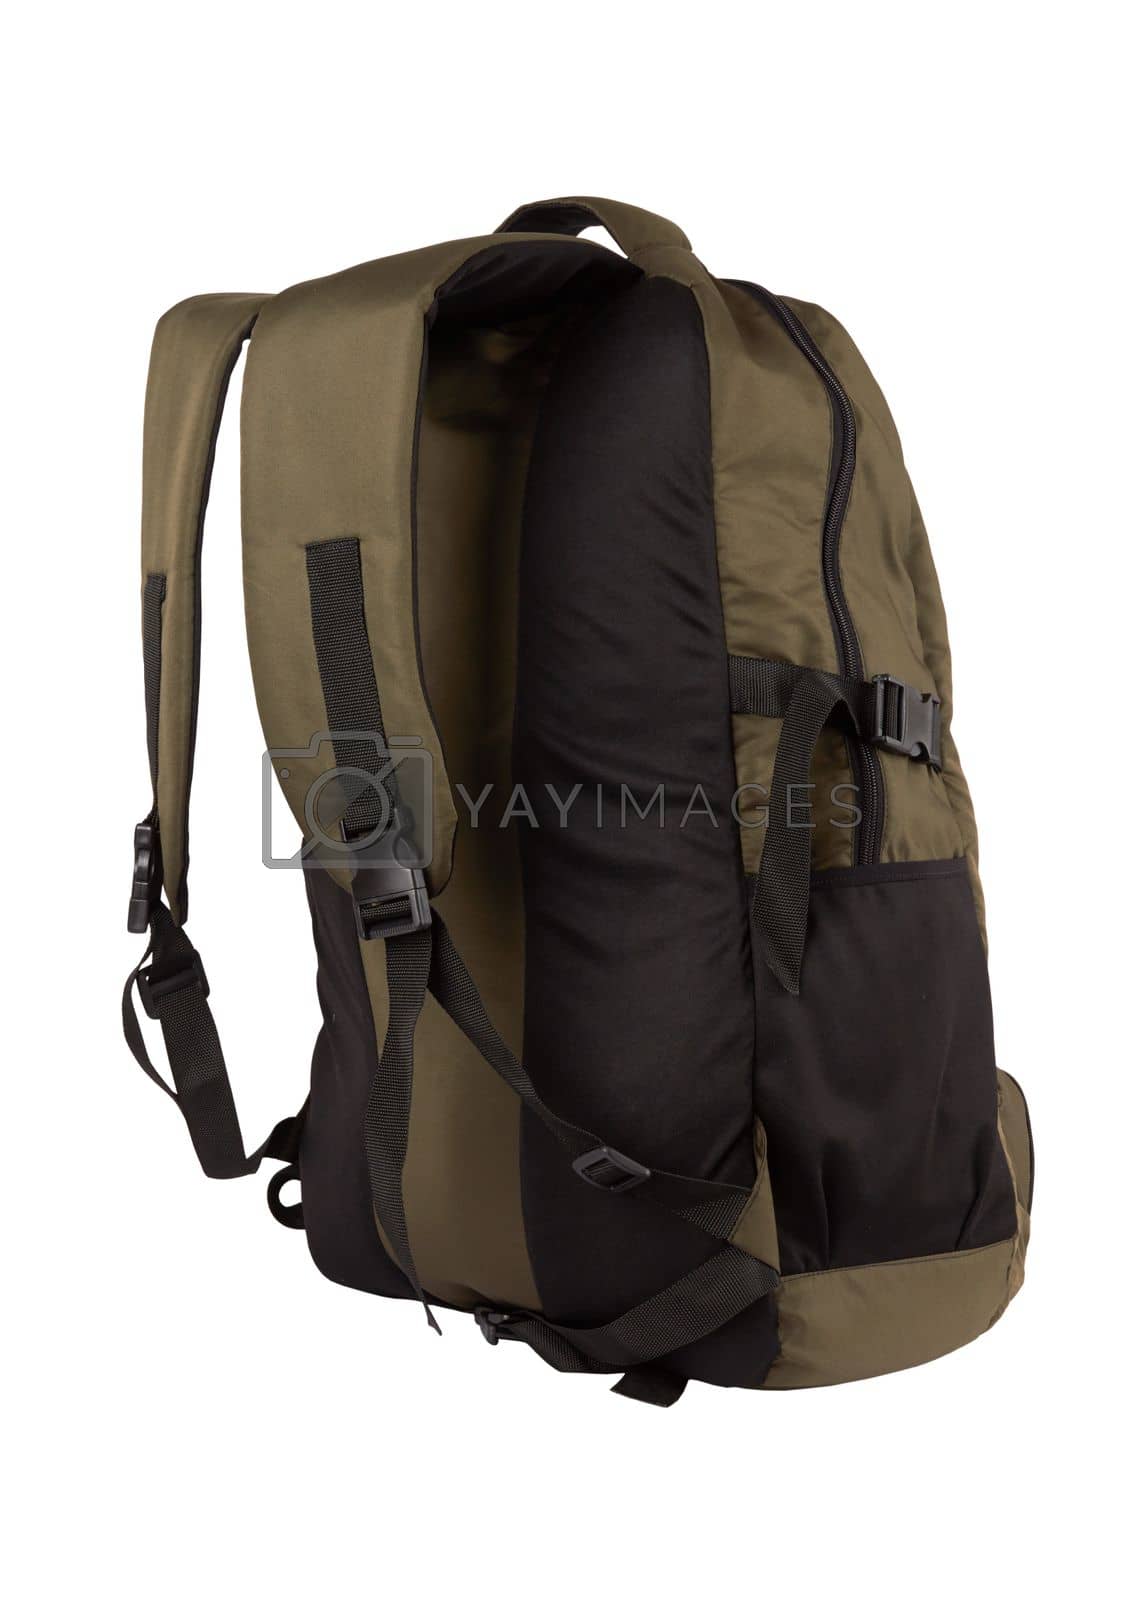 Royalty free image of Camouflage backpack on white by pioneer111